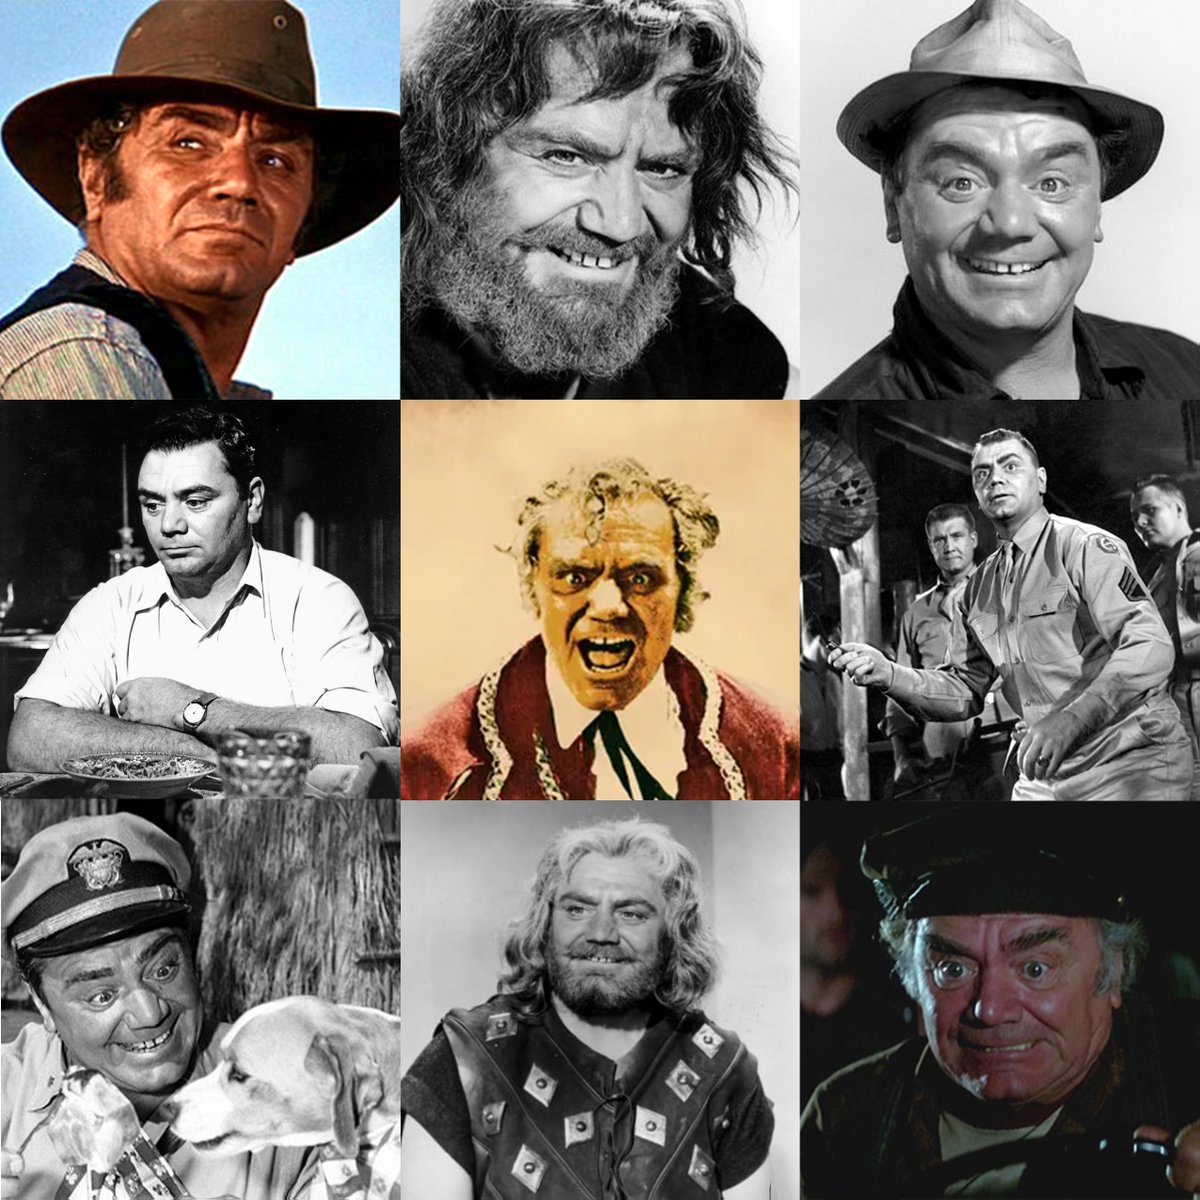 Remembering American actor Ernest Borgnine who passed away on this day 2012

#RestInPeace #ErnestBorgnine #ABulletForSandoval #HannieCaulder #TheWildBunch #Marty #EscapeFromNewYork #Airwolf